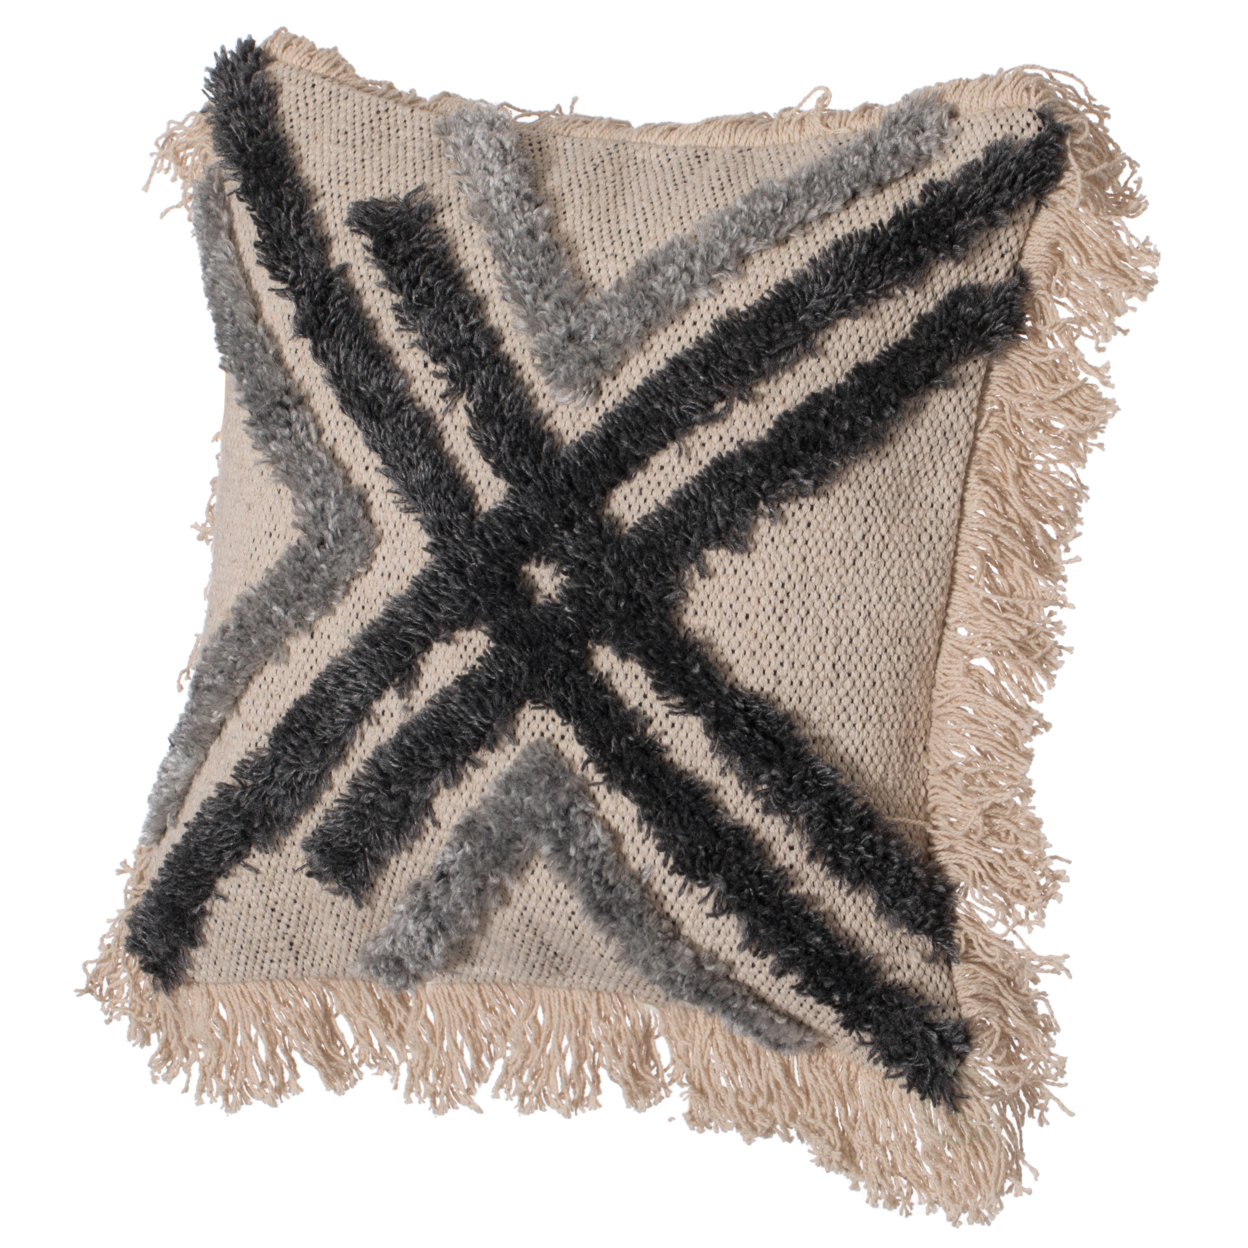 16 Handwoven Cotton & Silk Throw Fringed Pillow Cover Embossed Zig Zag & Crossed Lines Design - Zig Zag With Cushion